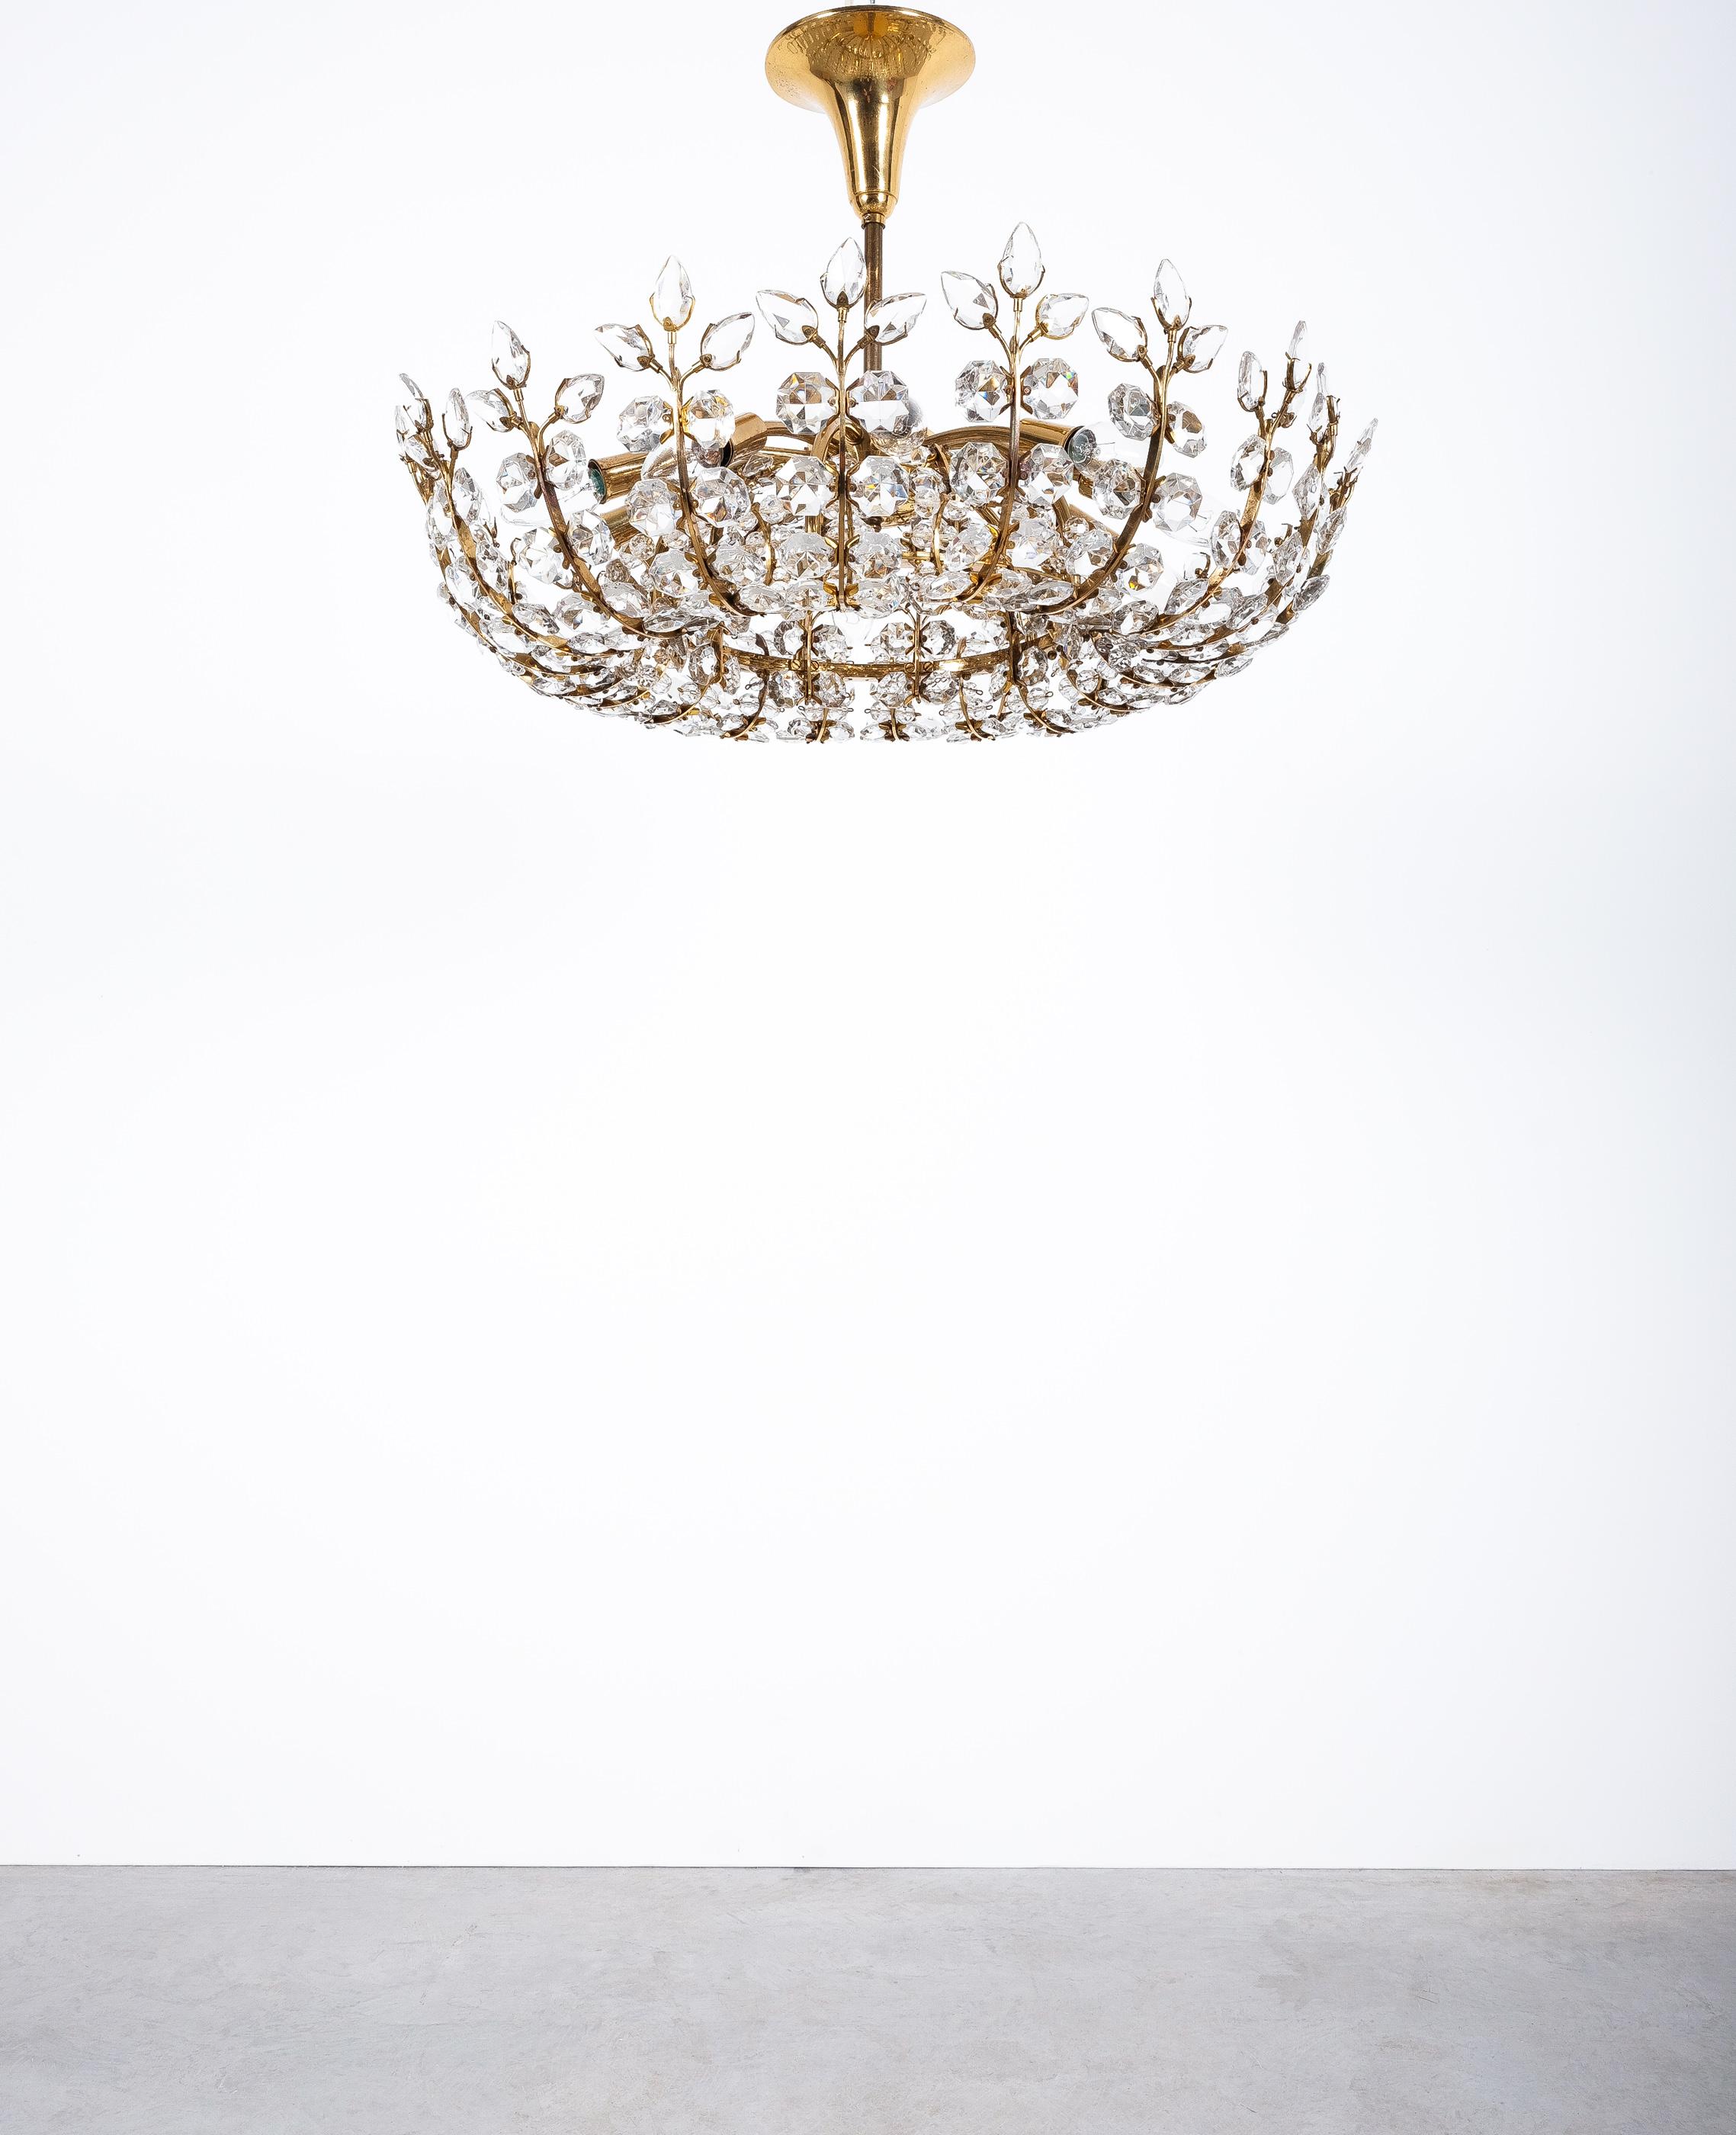 Chandelier designed by Oswald Haerdtl and manufactured by Bakalowits Vienna, circa 1950, Austria.

We can customize any drop required in our workshop free of charge, please inquire.

Majestic mid century chandelier in very good original